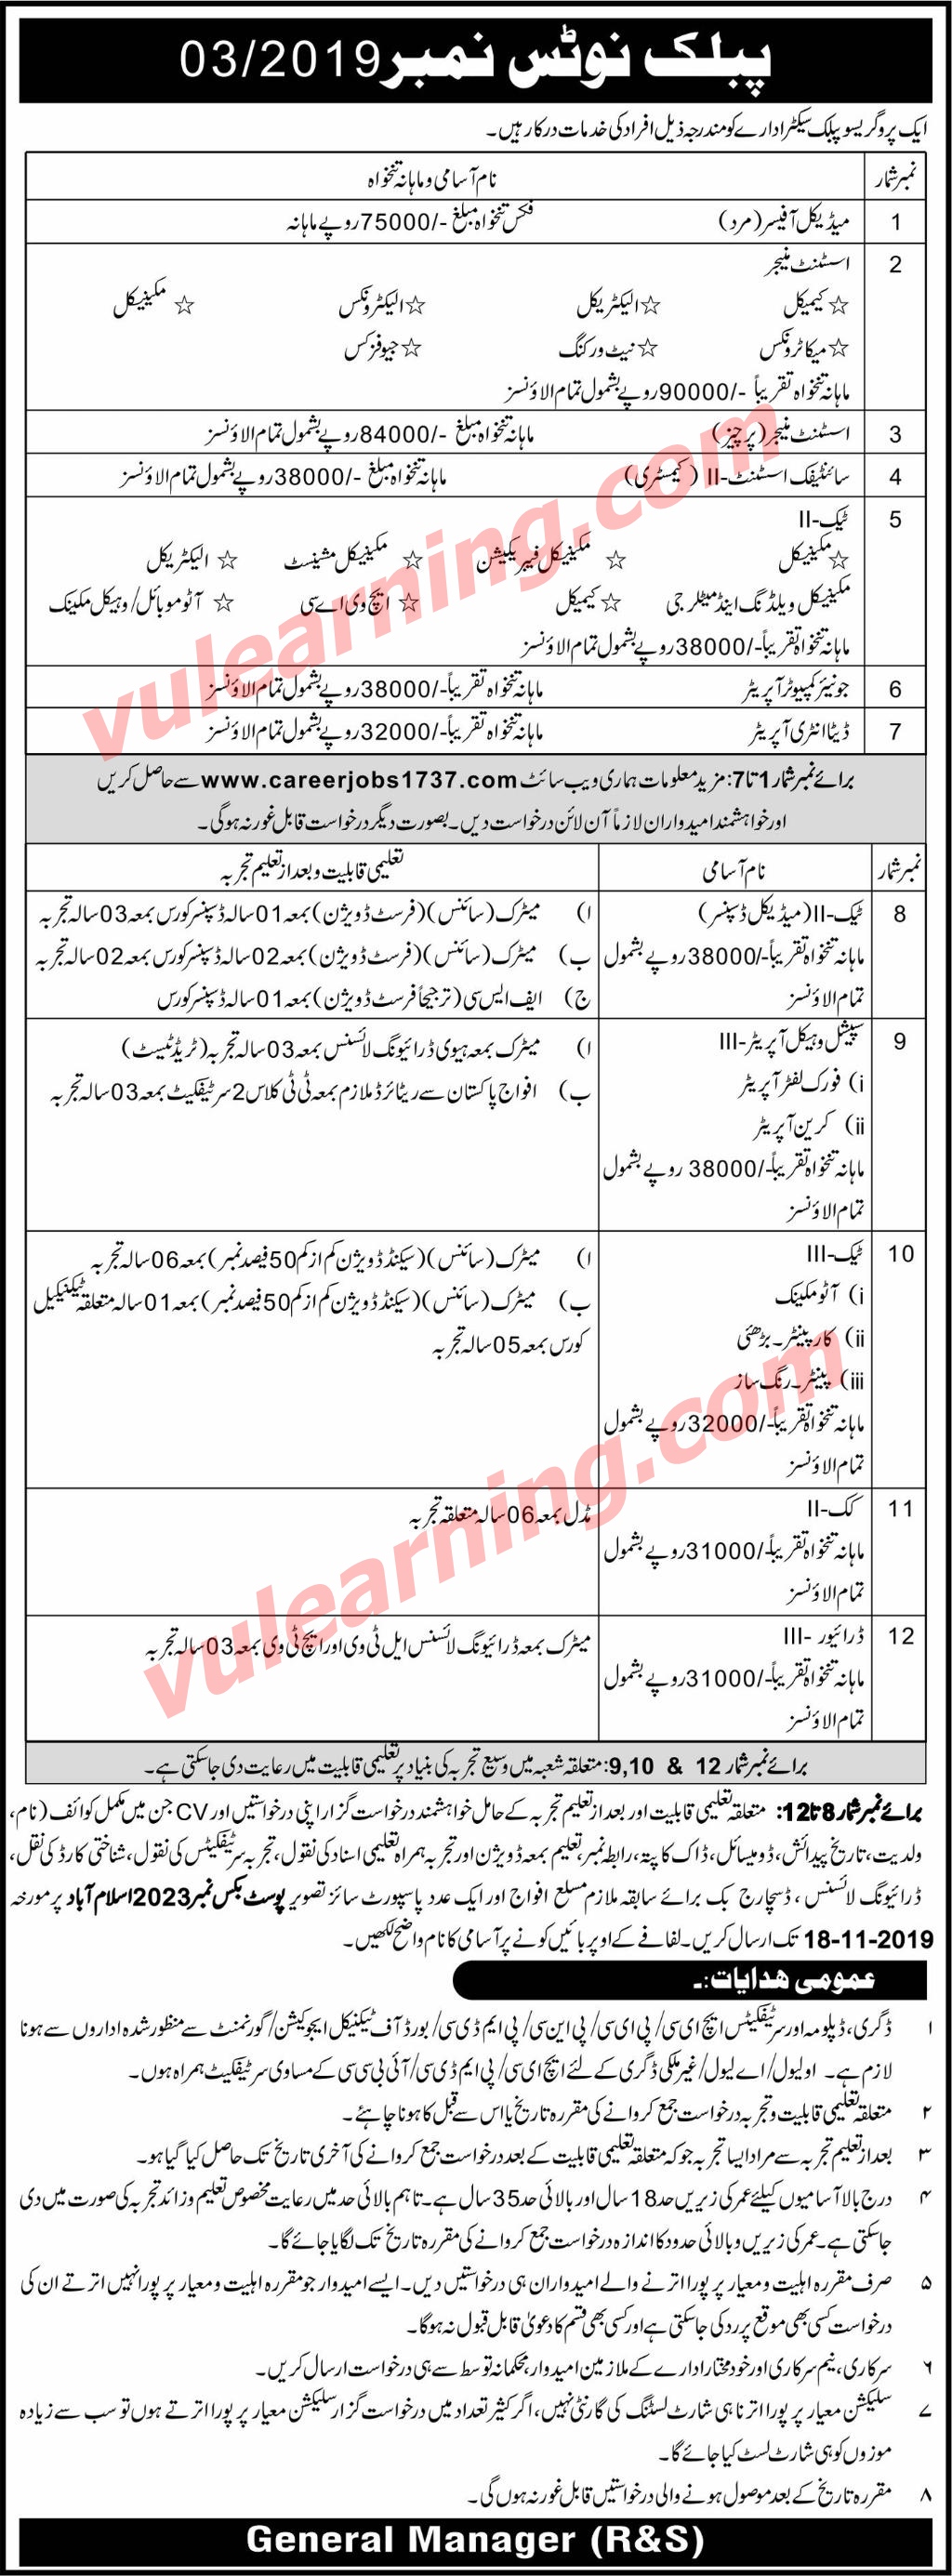 Nescom Jobs 2019 For Assistant Managers Technicians Jr Computer Operator Data Entry Operator Scientific Assistant Medical Officer Special Vehicle Operators Others Latest